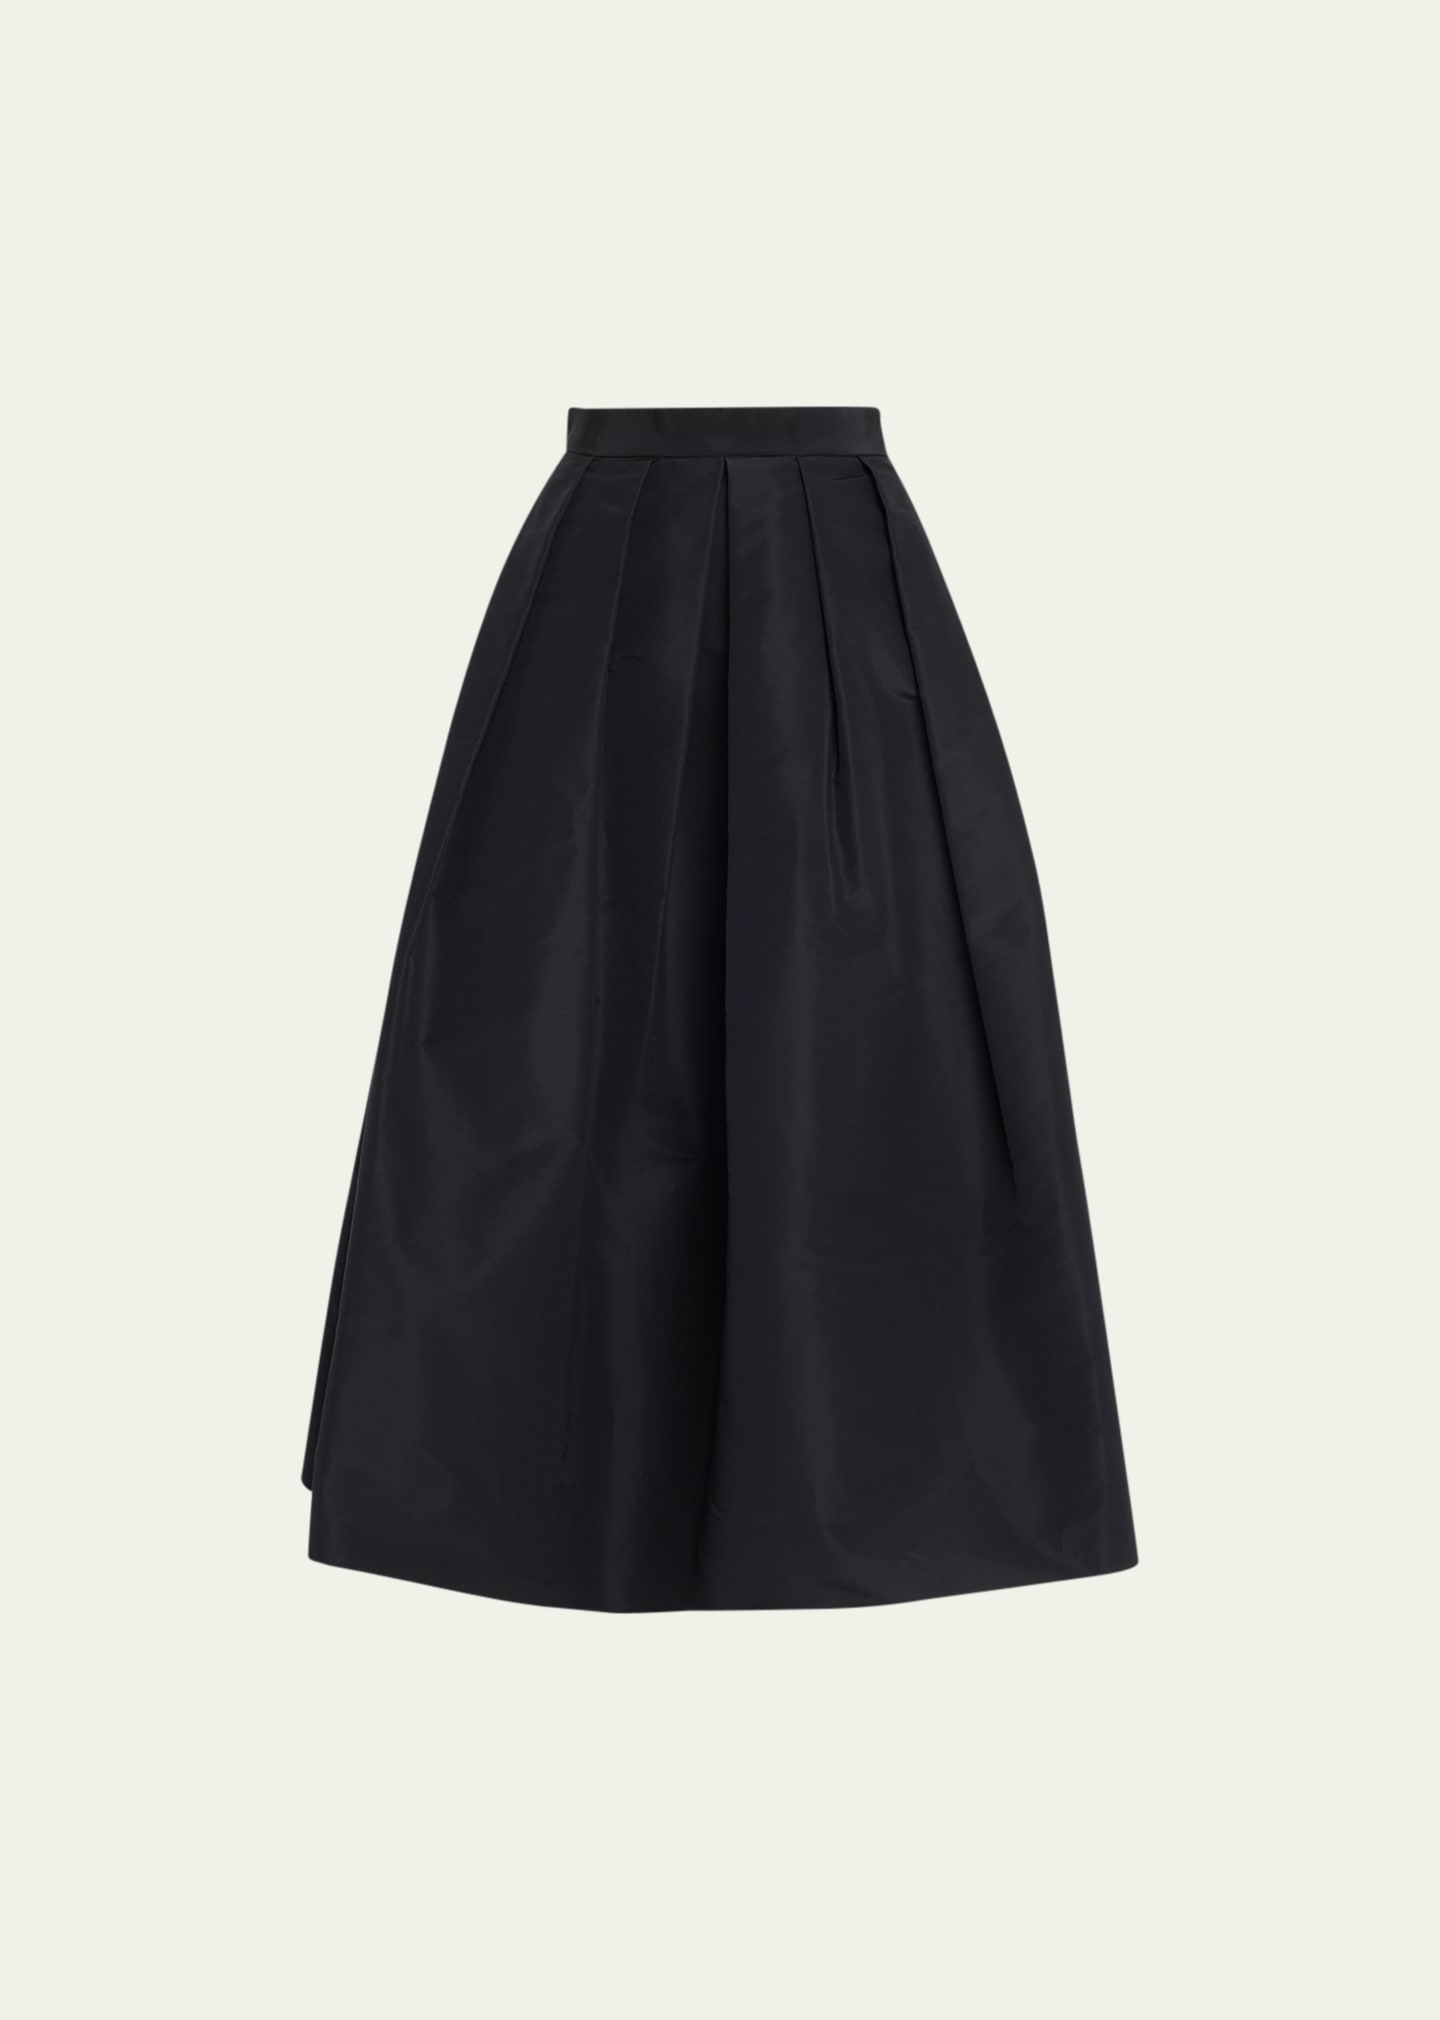 Heirlome Martina Pleated Skirt In Black